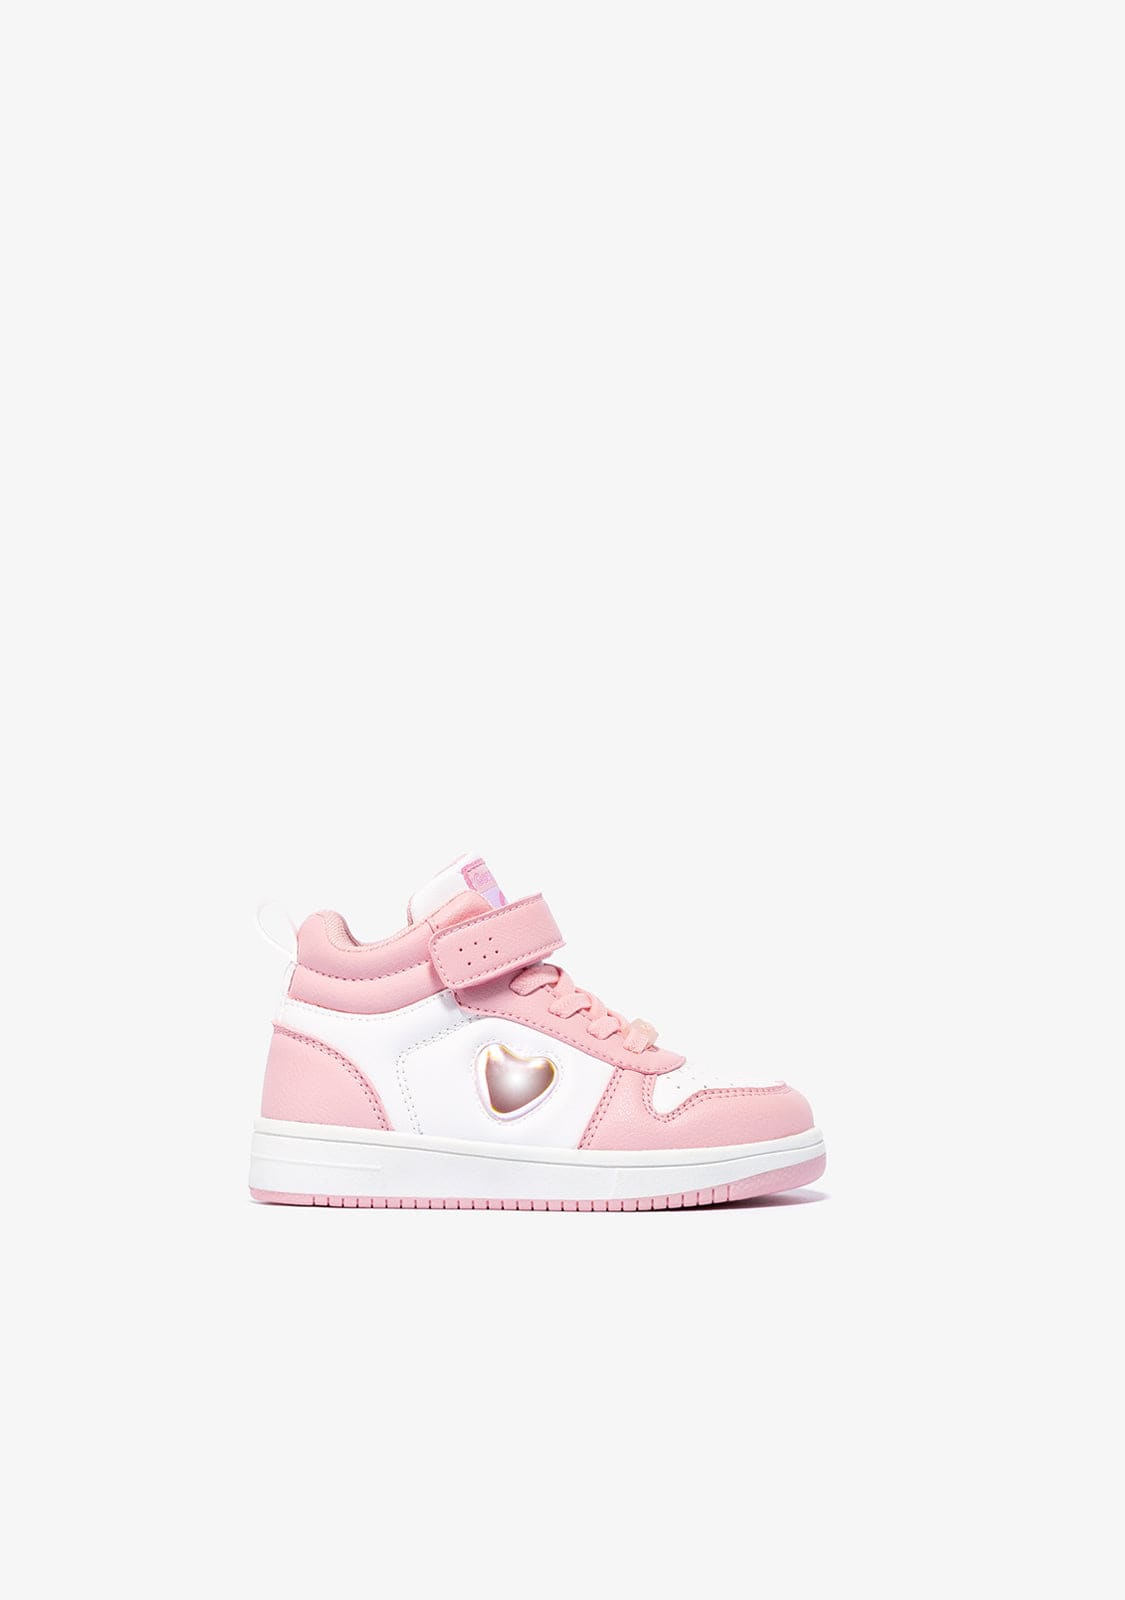 OSITO Shoes Baby's Pink / White With Lights Hi-Top Sneakers